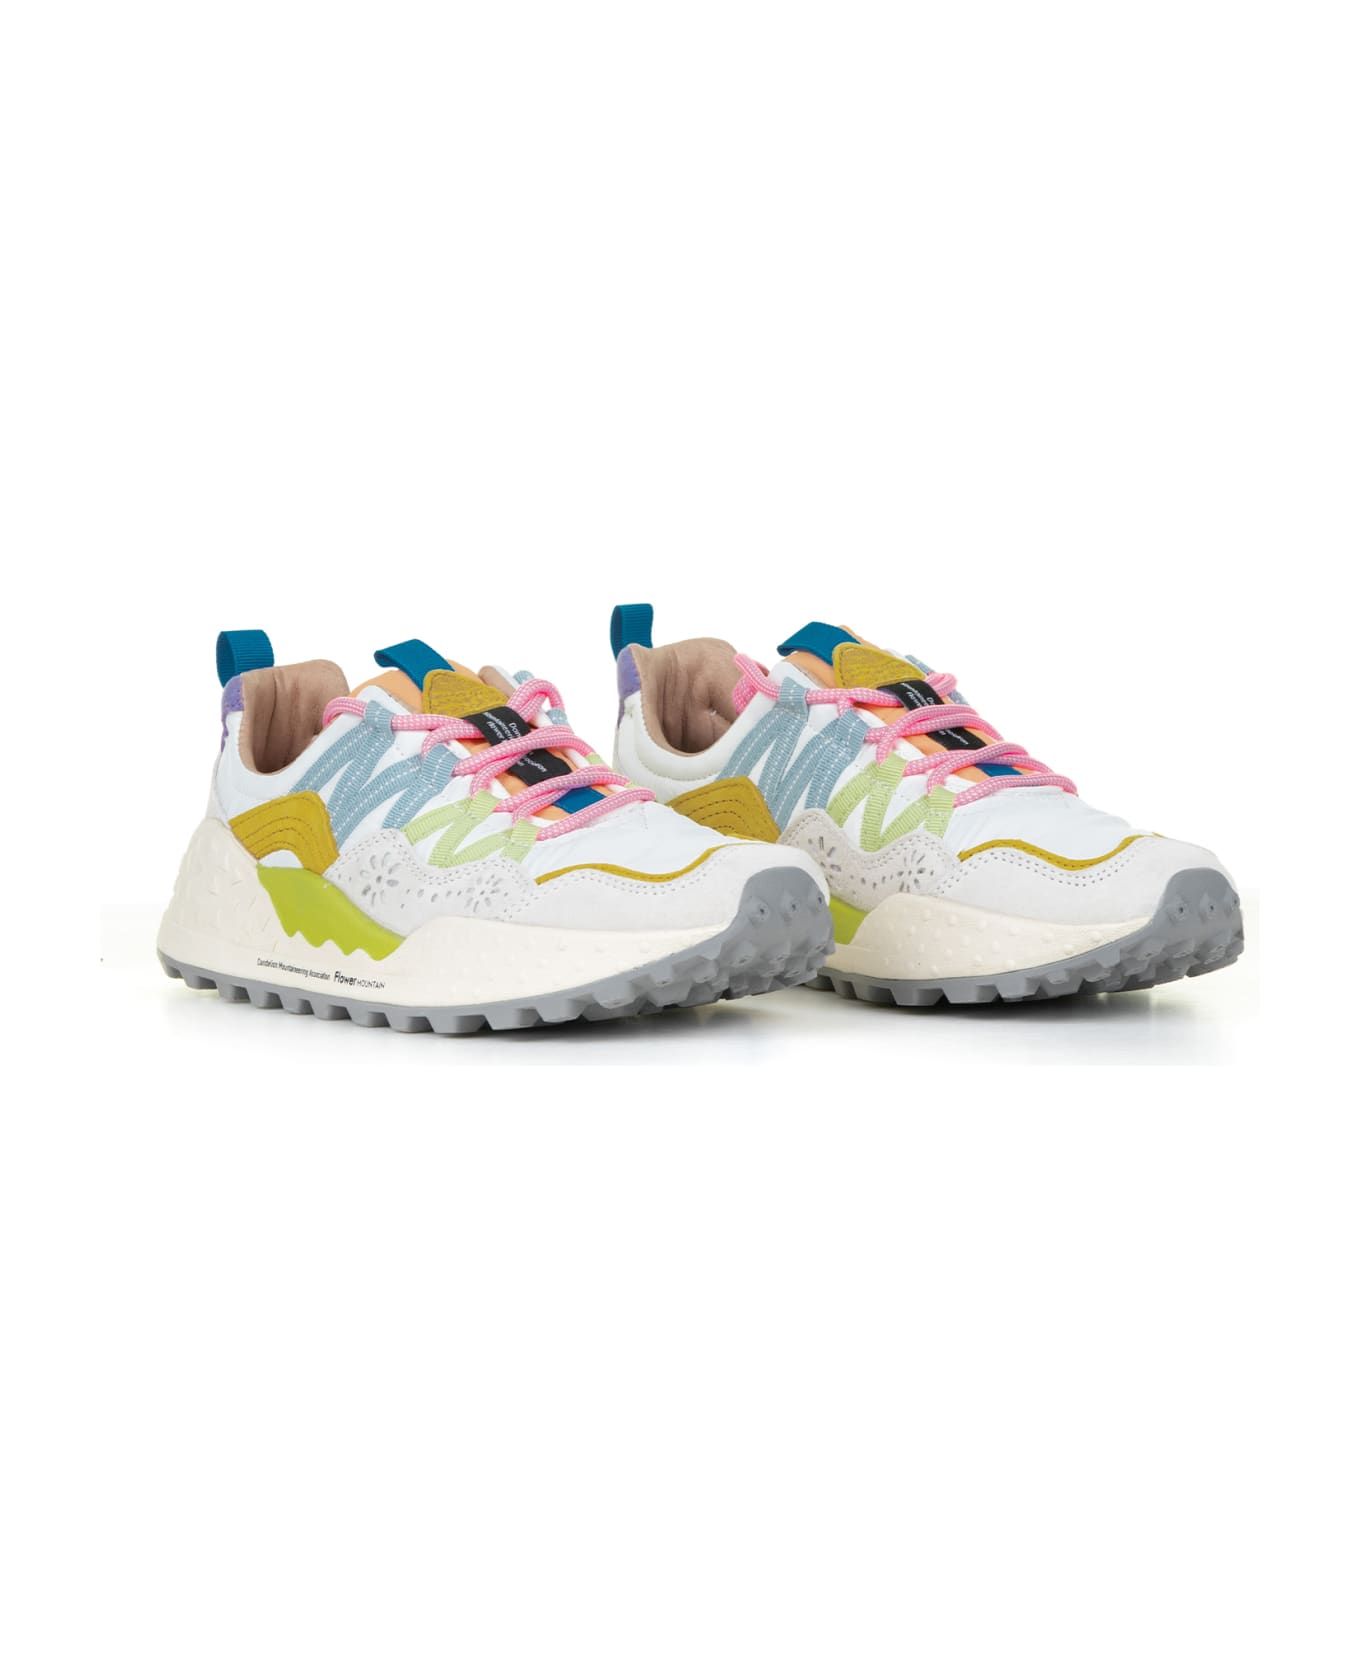 Flower Mountain Multicolored Washi Sneakers In Suede And Nylon - BEIGE WHITE MULTI スニーカー